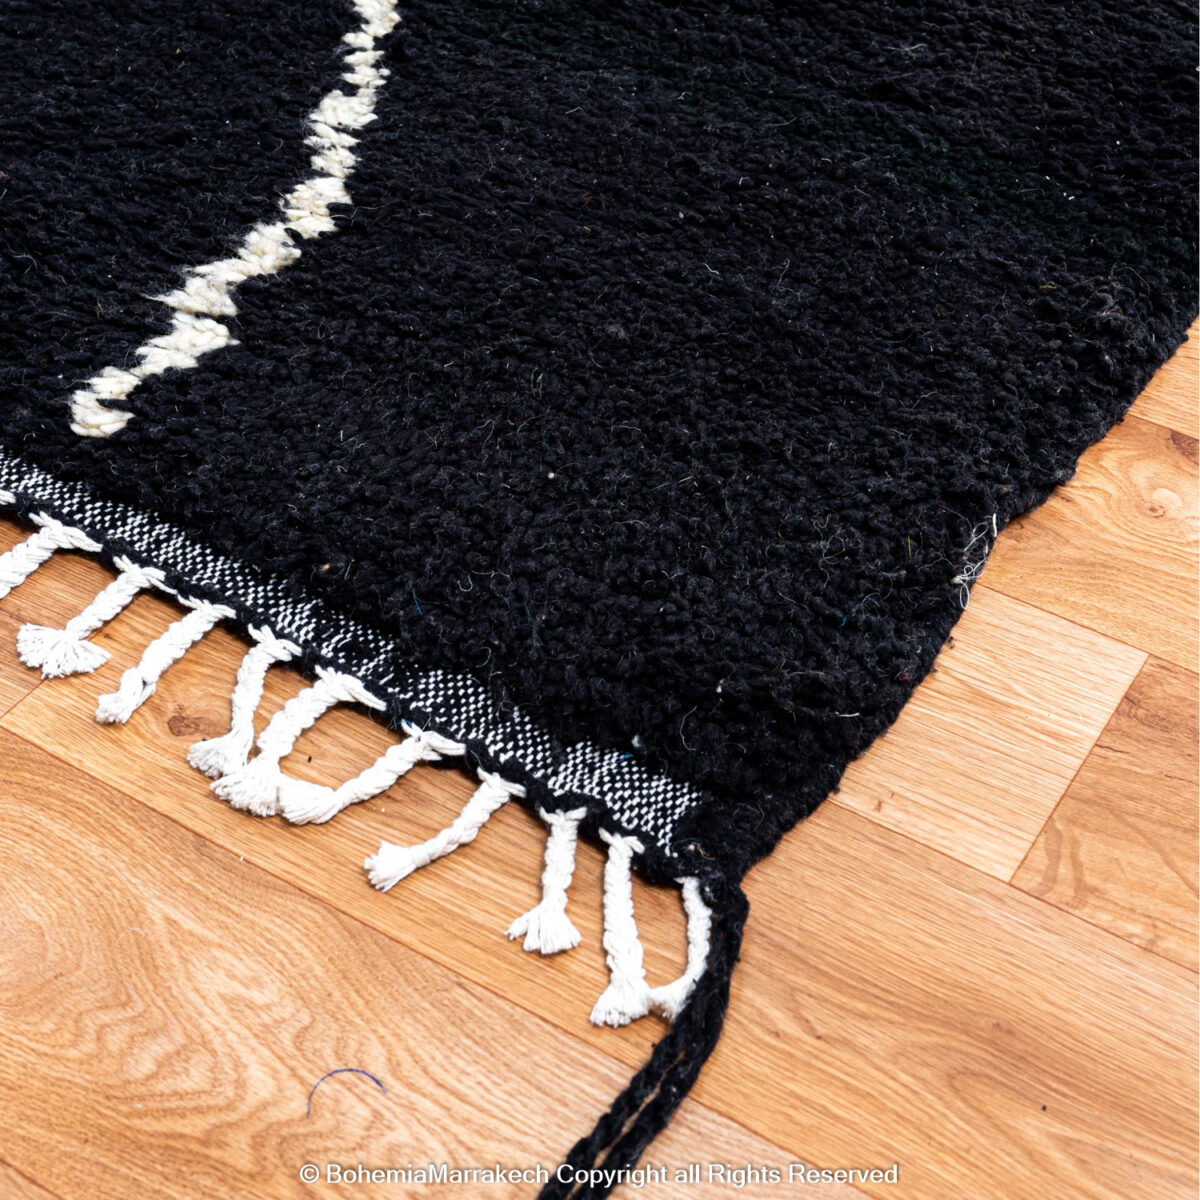 colorful rugs, Christmas rugs, Home Depot area rugs, bathroom runner rug, off-white rug, floral rug, rug size for king bed, rug size for queen bed, Lowes area rugs, rug size for living room, bear rug, big rugs for living room, flower rug, bath runner rug, large carpet rugs, Ernesta rugs, sheepskin rug, cream rug, hallway runner, Annie Selke rugs, vintage rugs, cheap carpets, professional carpet cleaning near me, kilim rugs, Nourison rugs, Crate and Barrel rugs, red rug, green area rug, oval rug, washable rugs 8x10, 10x10 rug, outdoor area rug, 5x7 area rugs, NuLoom rug, carpet cost per square foot, Home Goods rugs, rag rugs, carpet price per square foot, rug gripper, professional rug cleaning near me, layering rugs, Dashandalbert, sheepskins, rug gripper for carpet, Nourison carpet, Home Depot carpet installation, Chris Loves Julia rugs, grey rug, 10x14 area rugs, 10x14 rug.